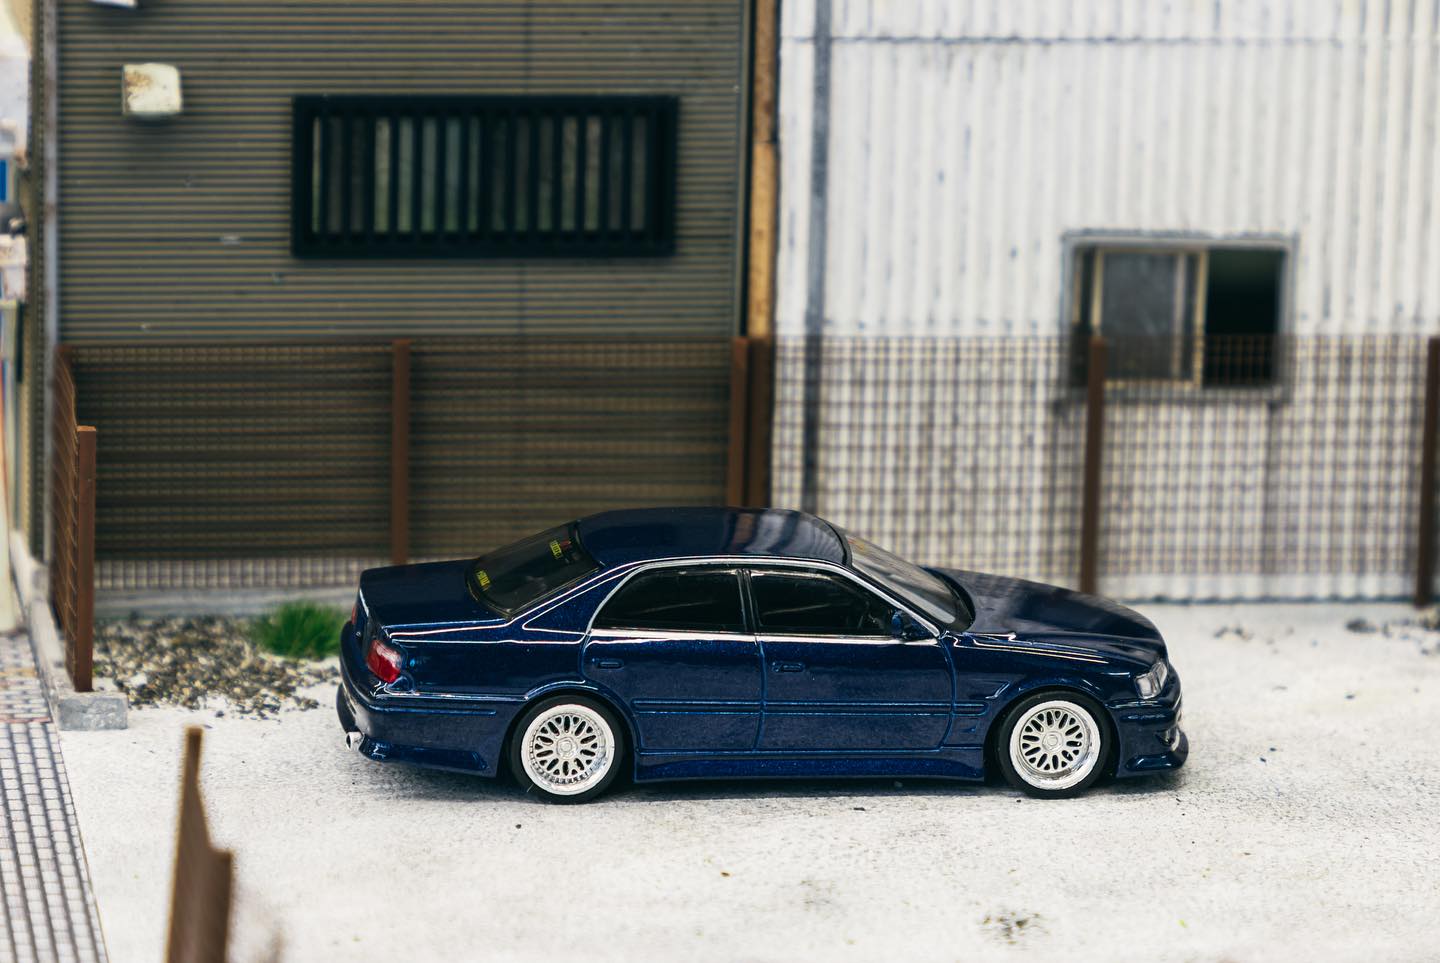 Tarmac Works 1/64 Vertex Toyota Chaser JZX100 in Blue